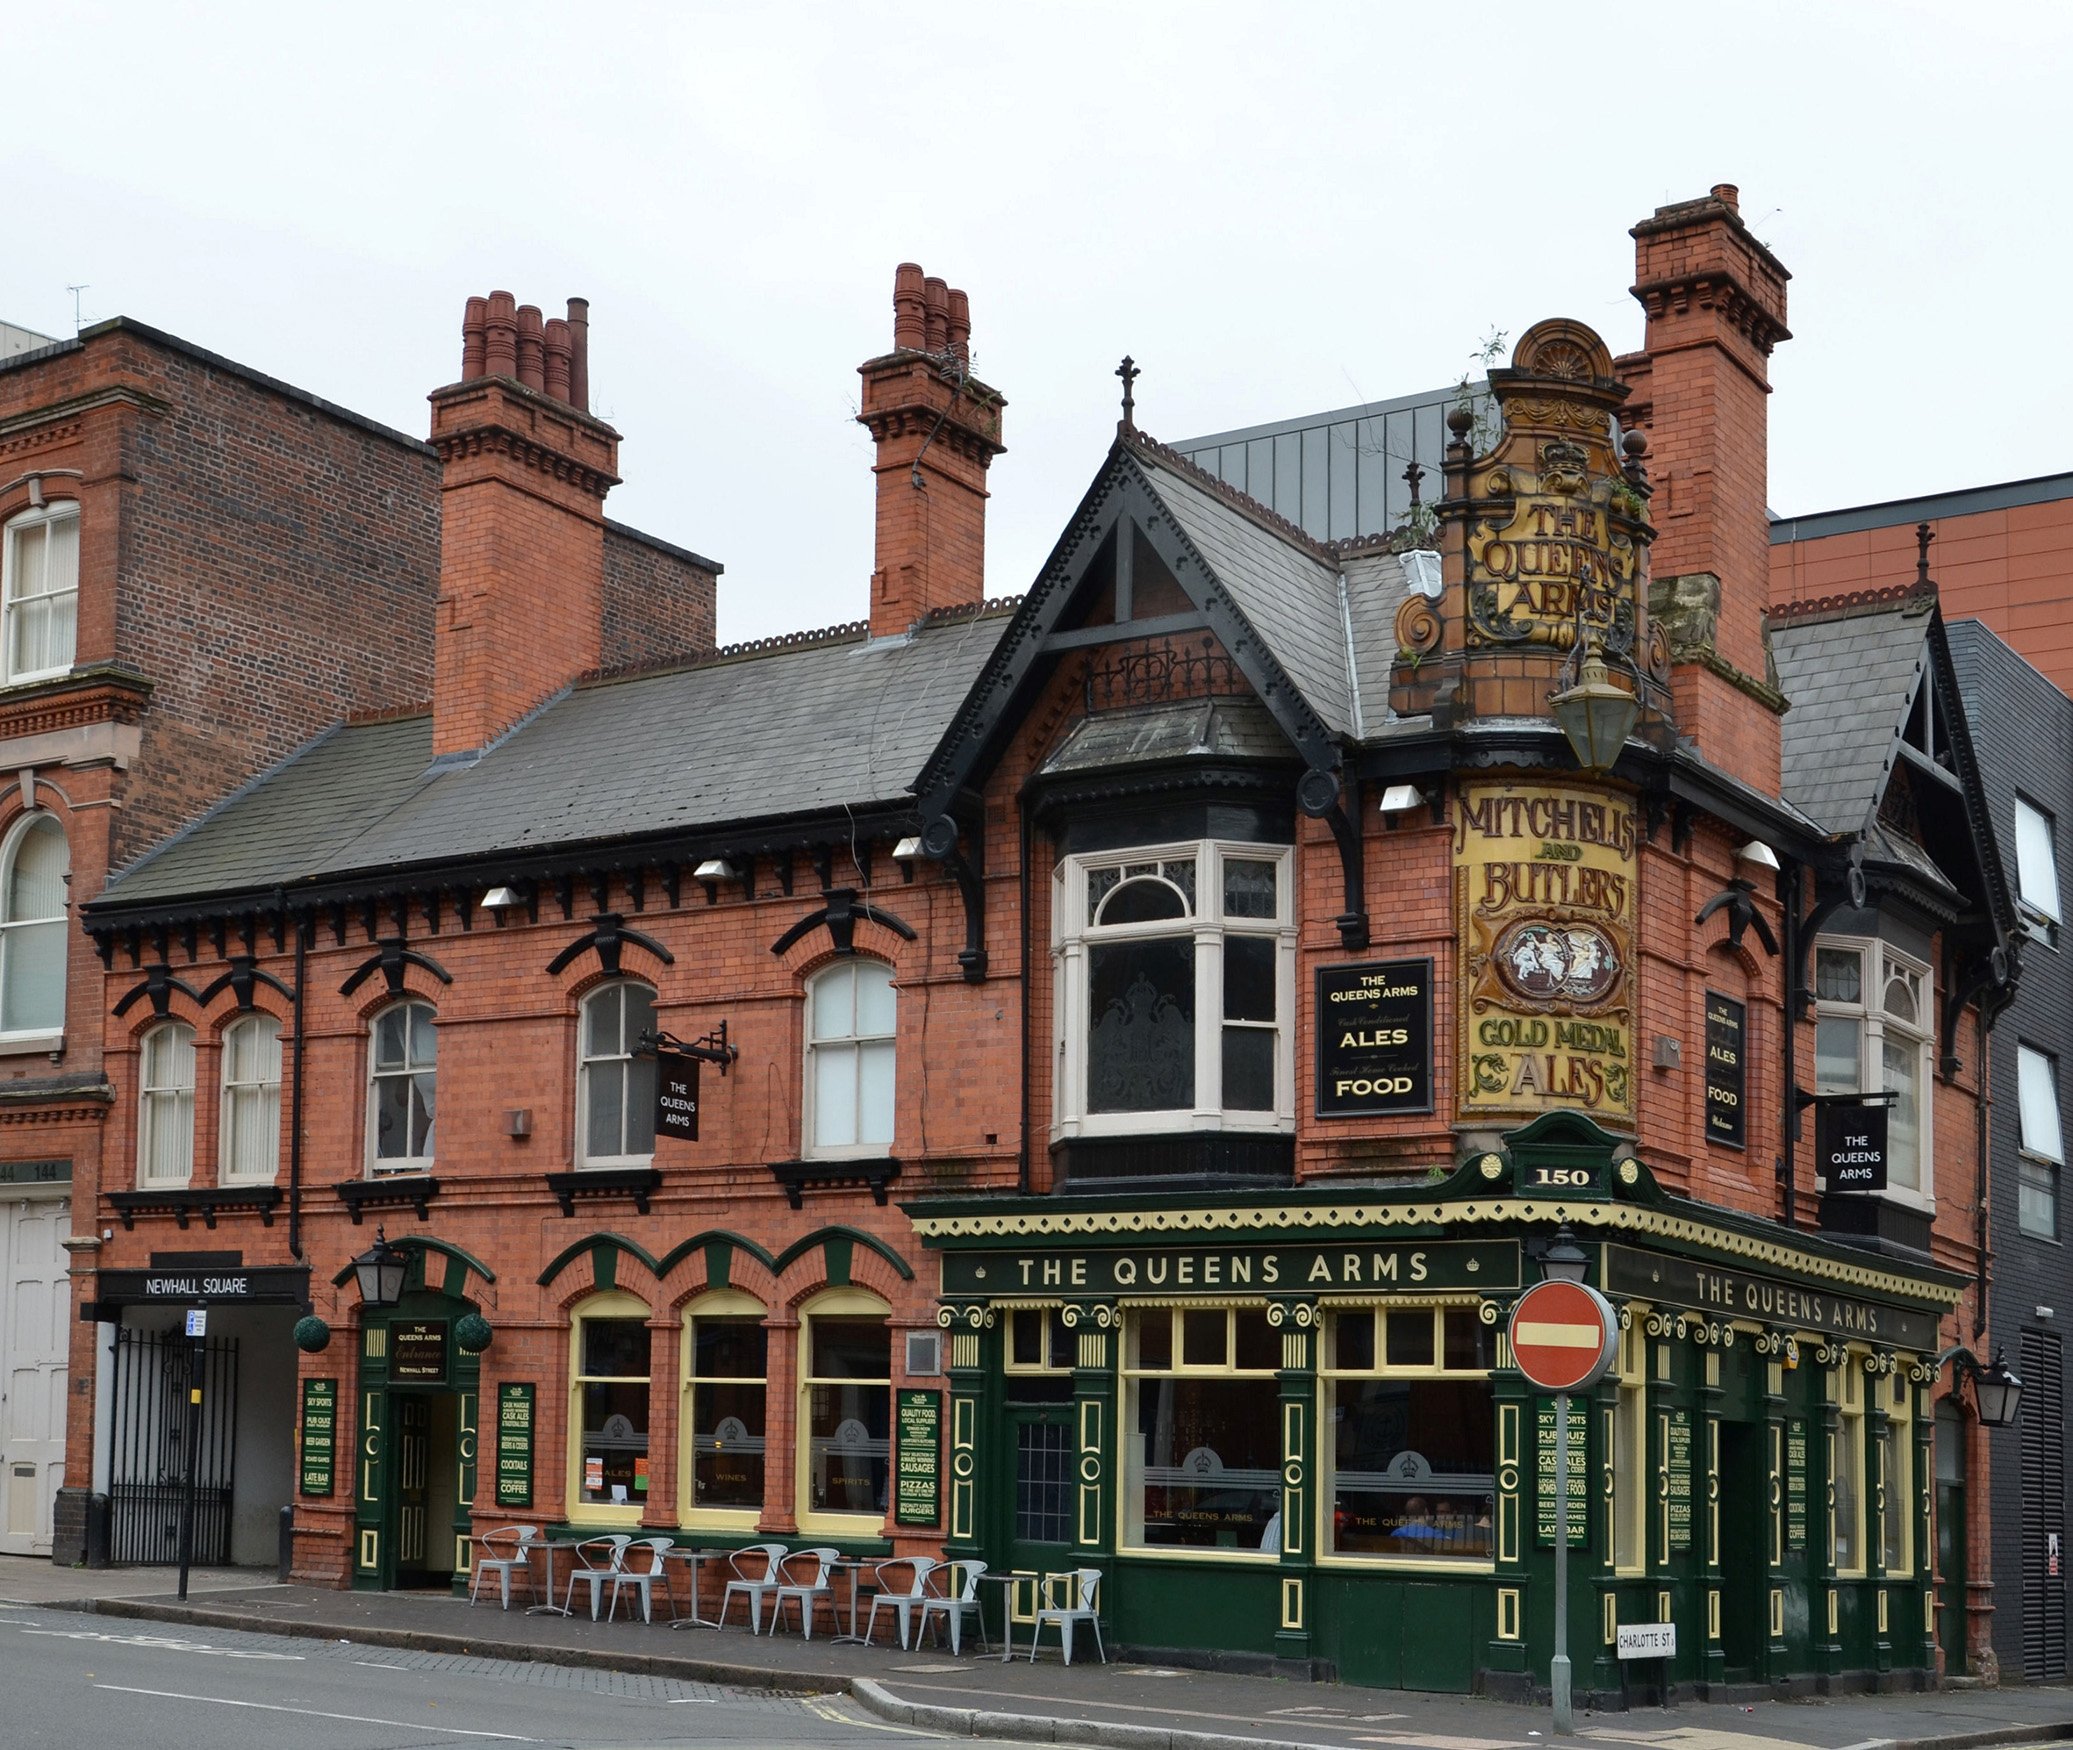 A photo from street level of a pub in Birmingham with green frontage and bay windows on the ground floor